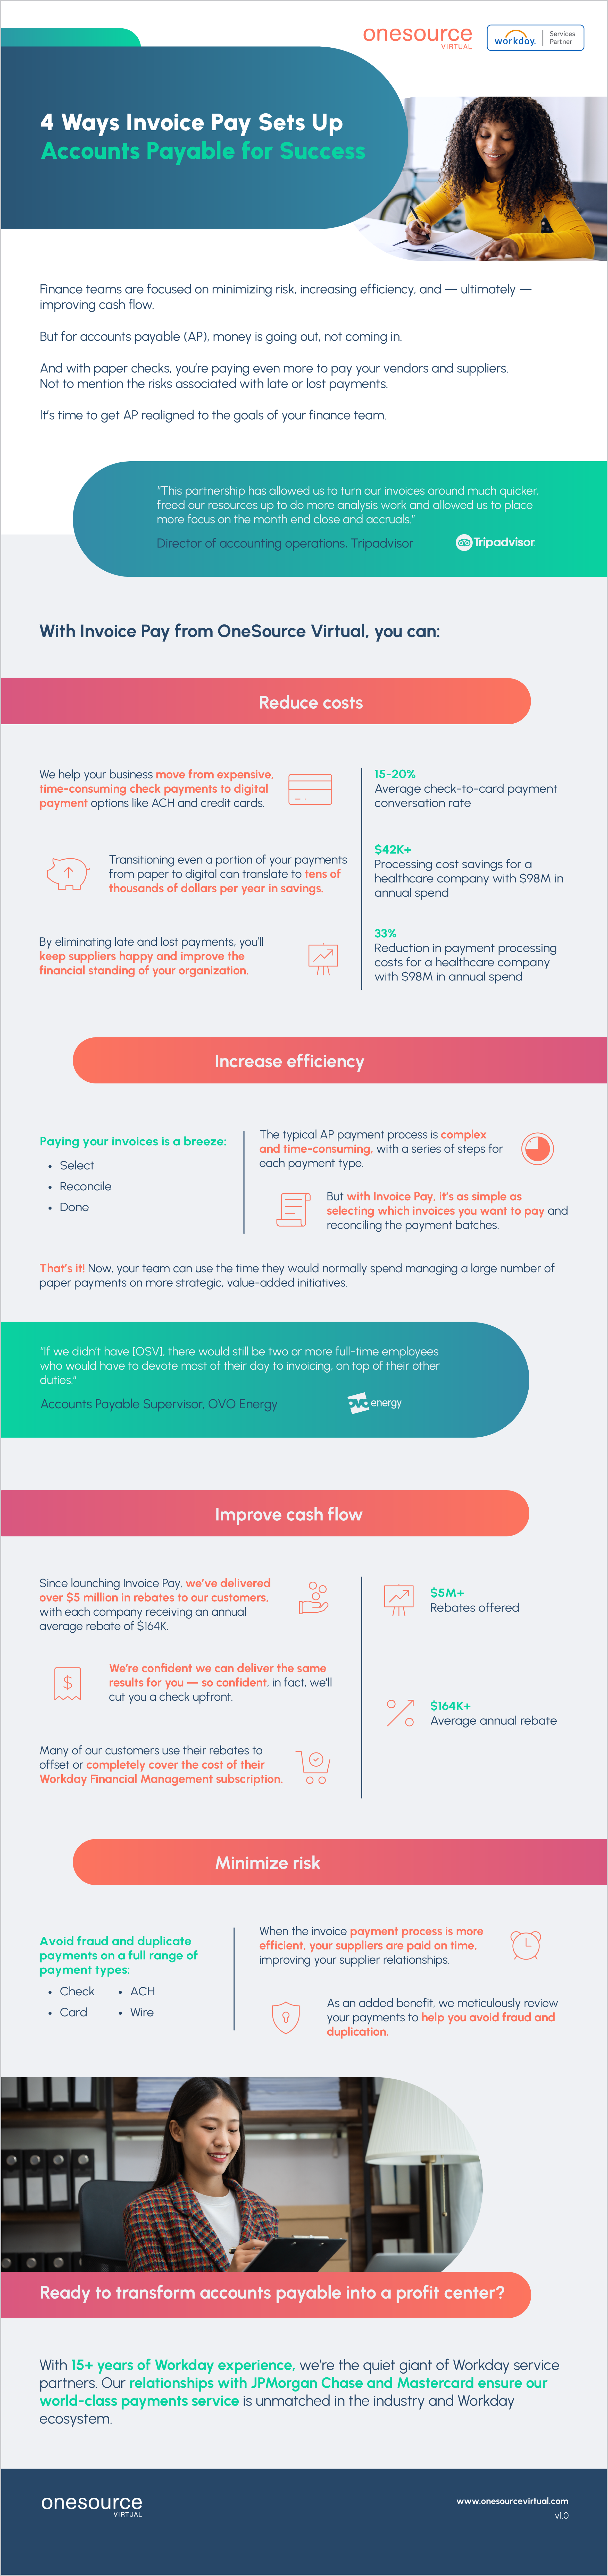 24_7320_ONE_How AP Rebates Can Boost Cashflow Infographic BLOG 3.2